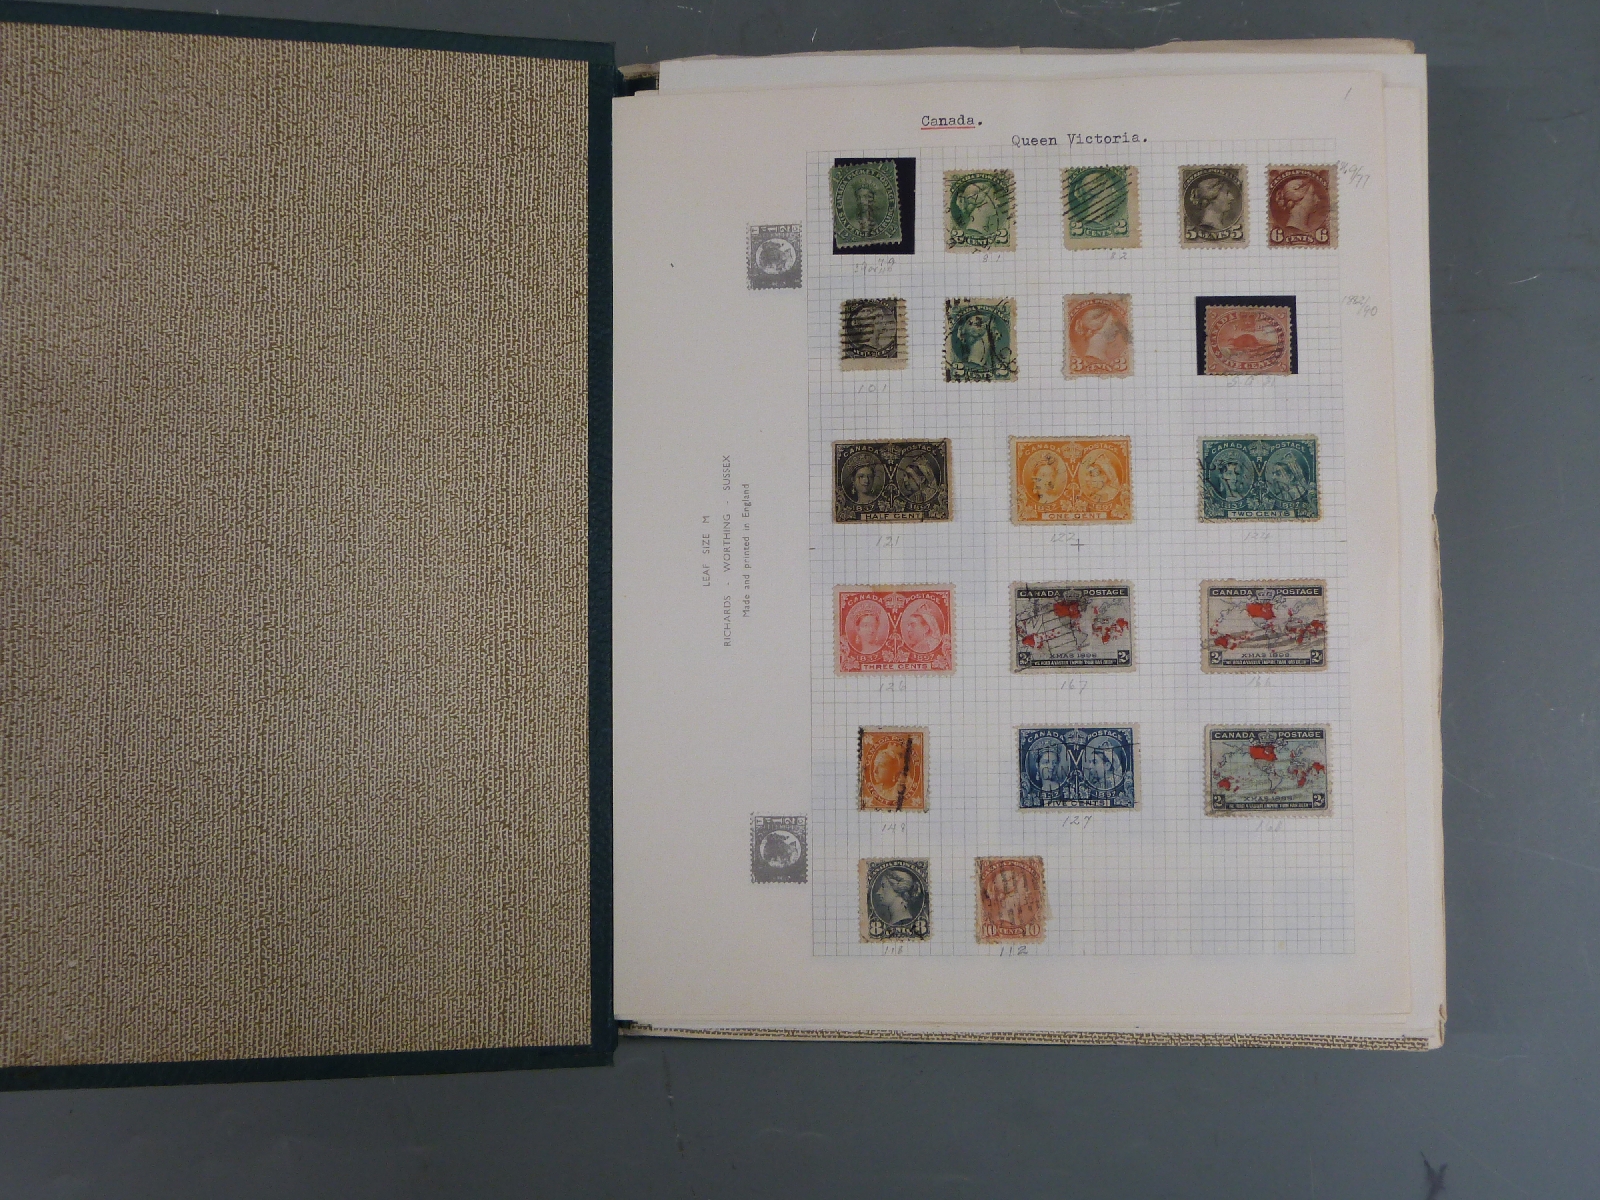 A loose leaf album of Commonwealth stamps plus some foreign stamps, mainly Victoria - George VI - Image 4 of 4